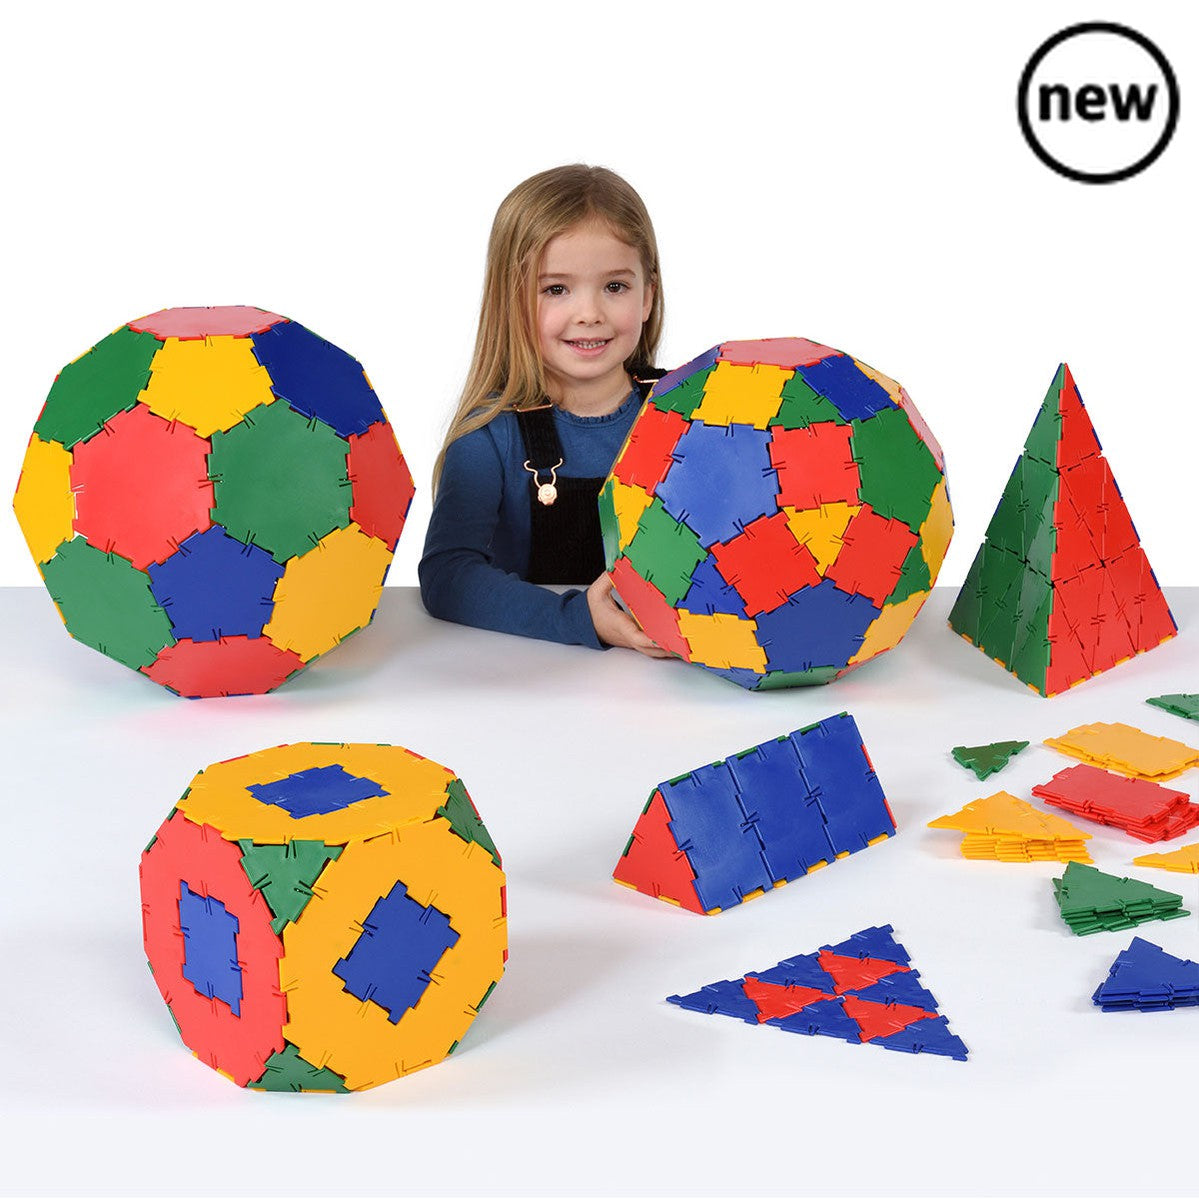 Polydron Primary Maths Set, The Polydron Primary Maths Set is the ultimate resource for primary schools, providing a comprehensive collection of mathematical shapes for classroom activities and lessons. Specifically designed to be used in conjunction with the 'Primary Mathematics with Polydron' book, this set offers a hands-on approach to learning mathematics.Featuring over 400 pieces of different mathematical shapes, the Polydron Primary Maths Set offers endless possibilities for exploration and discovery.